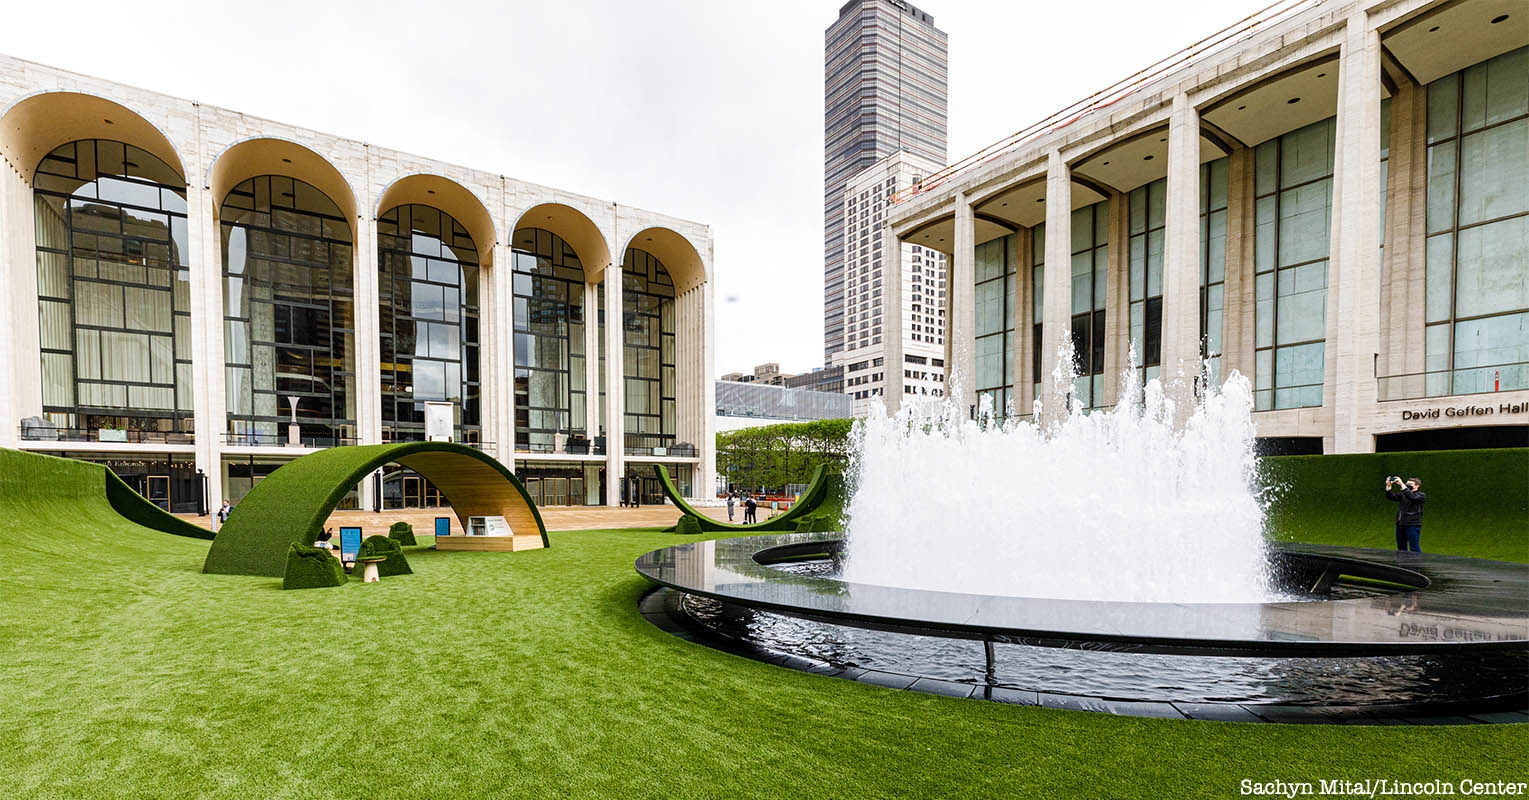 Lincoln-Center-The-Green-Restart-Stages-Plaza-NYC-7-1.jpg